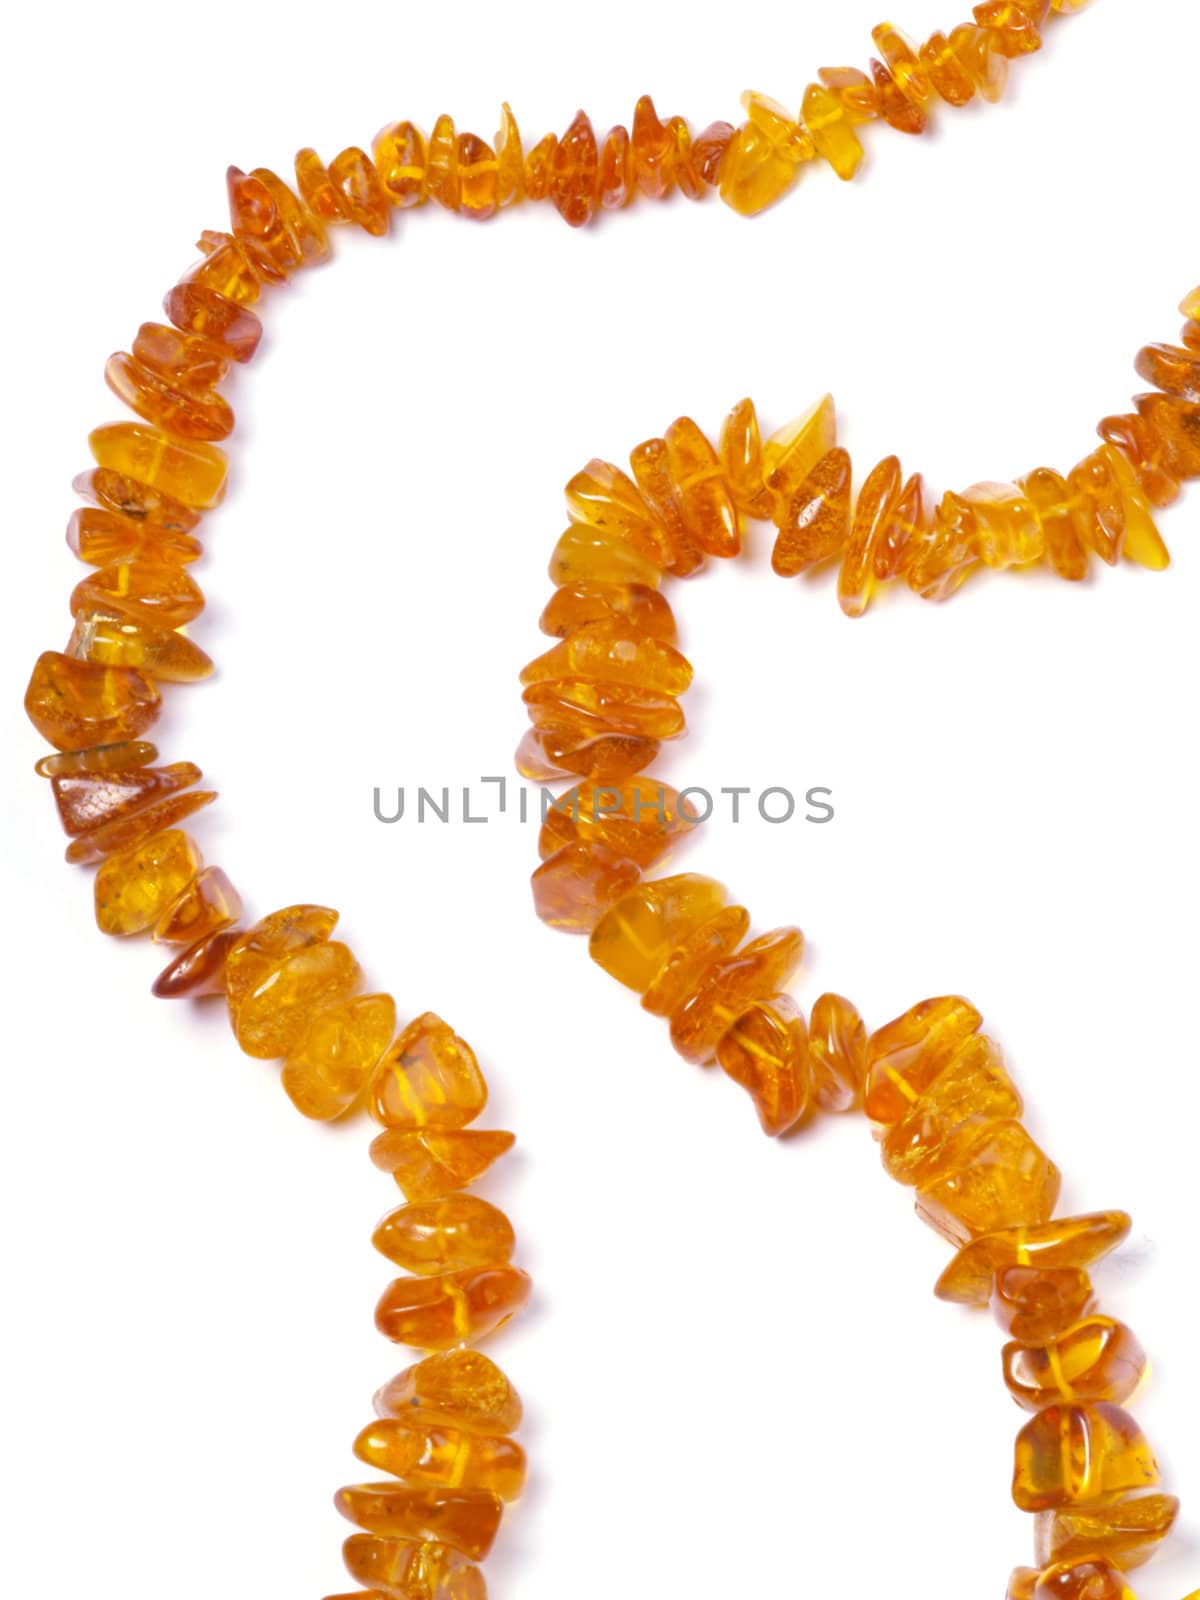 amber bead on off- white background close up